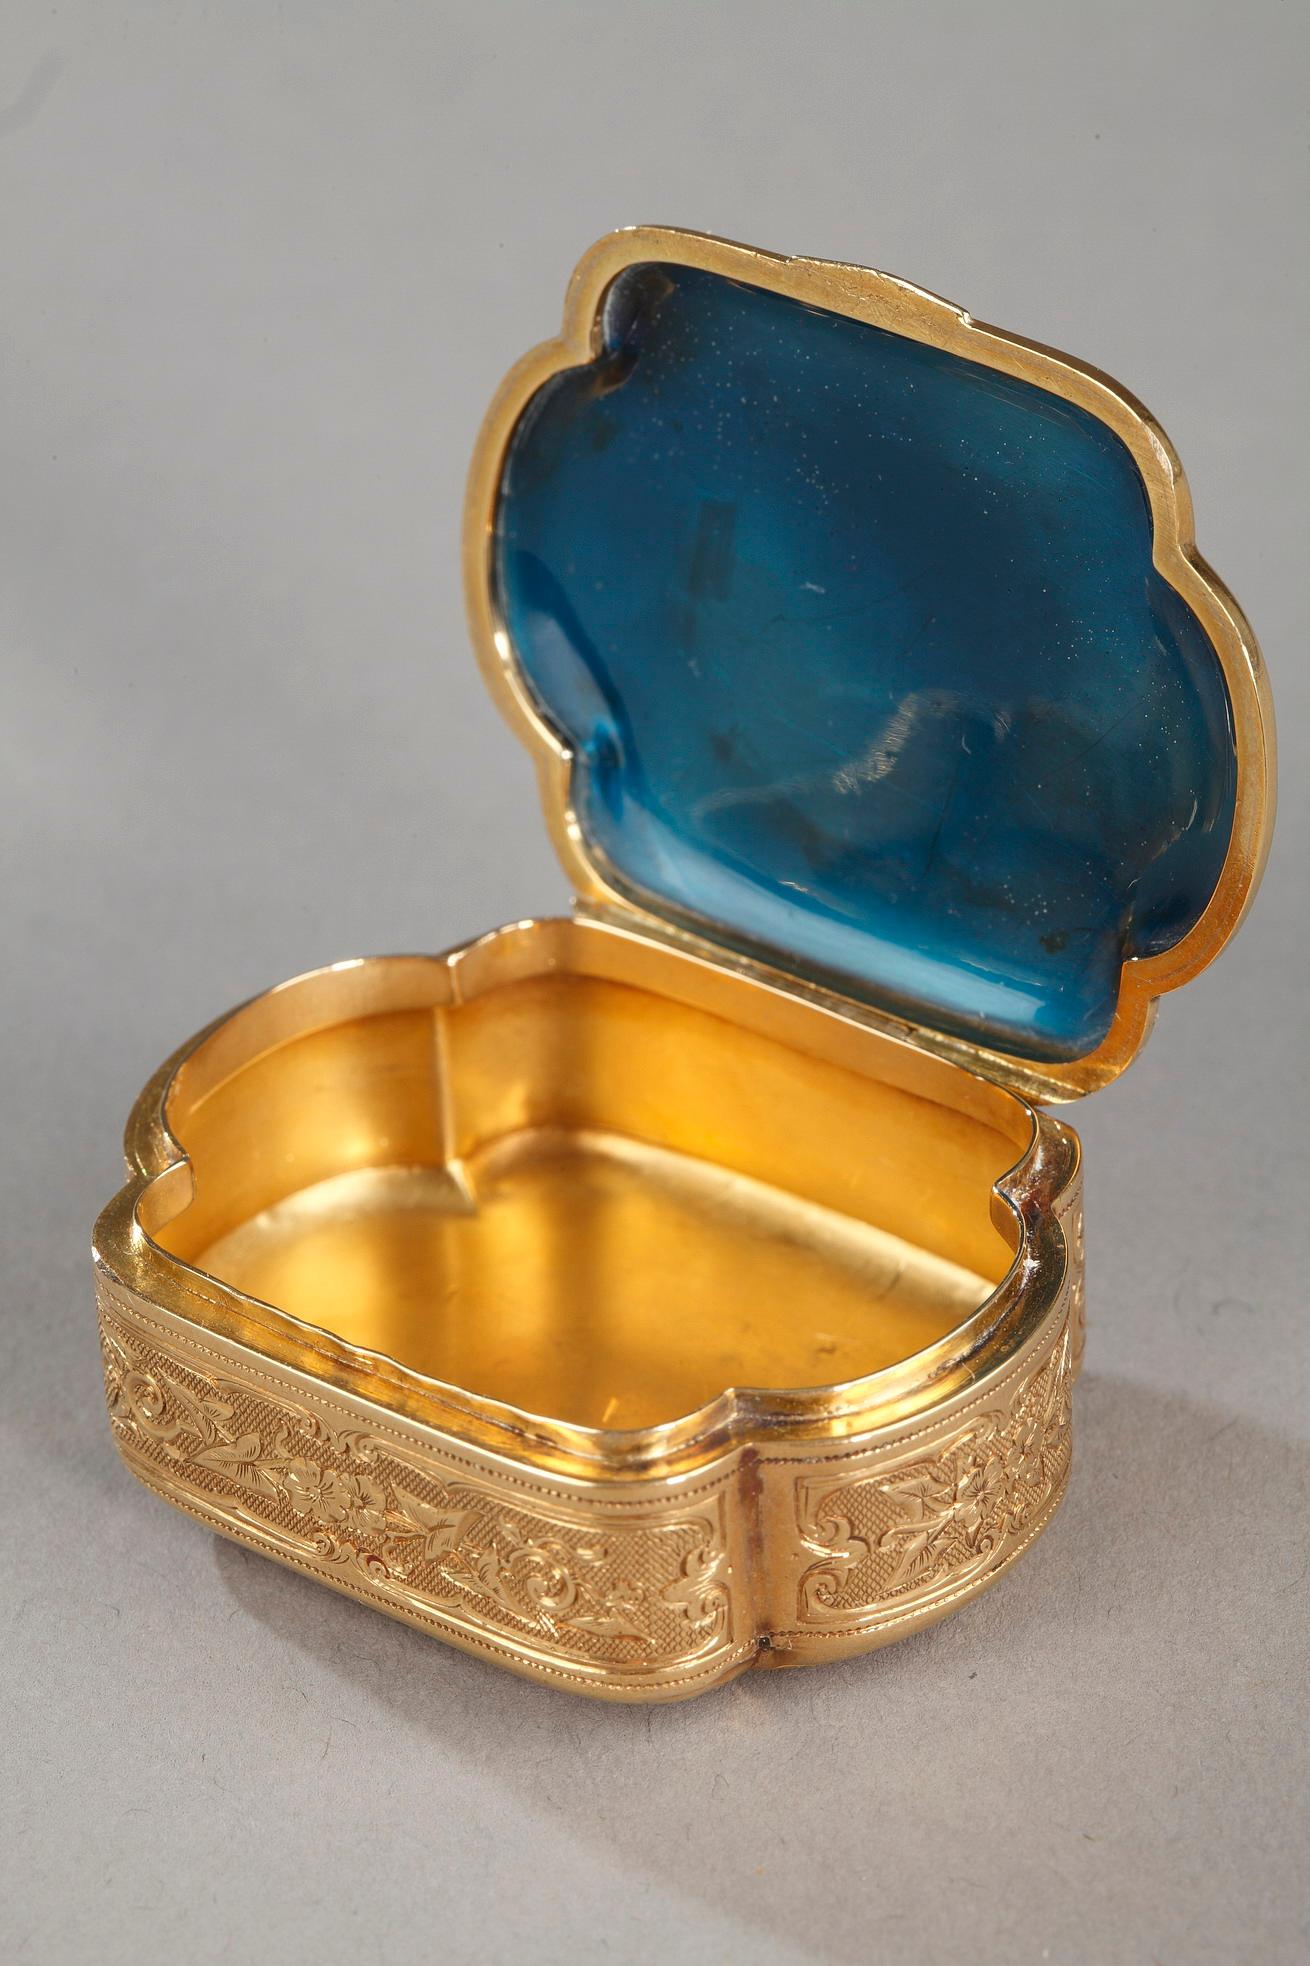 Box in gold and enamel with scalloped edges. The lid is decorated with a guilloche polylobed medallion and decorated at its center with a bouquet of roses. This pattern left in reserve stands out against a background of translucent green enamel. The